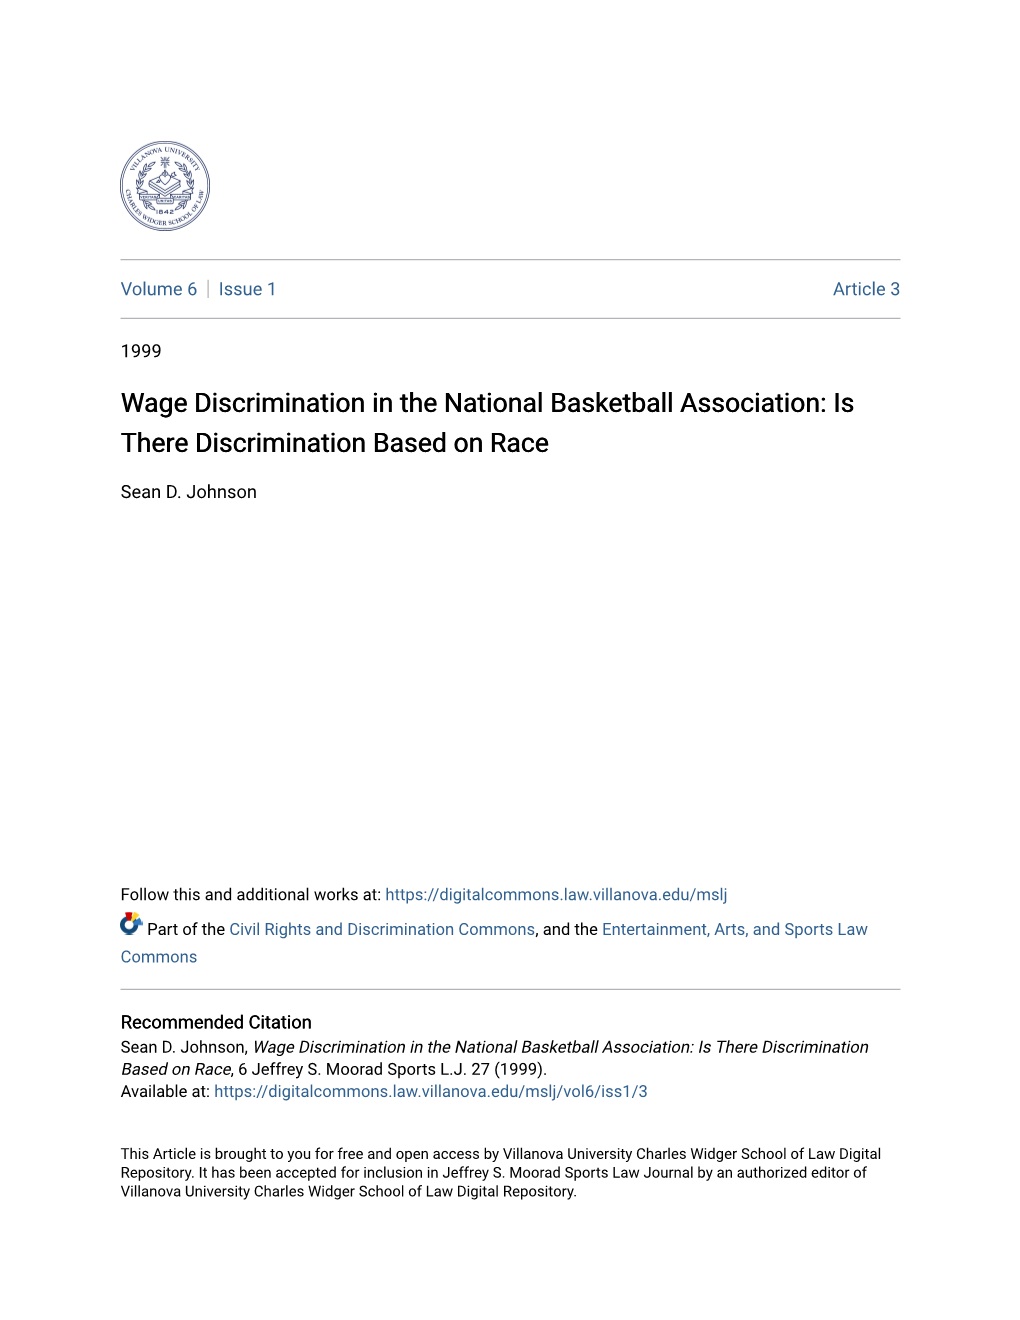 Wage Discrimination in the National Basketball Association: Is There Discrimination Based on Race